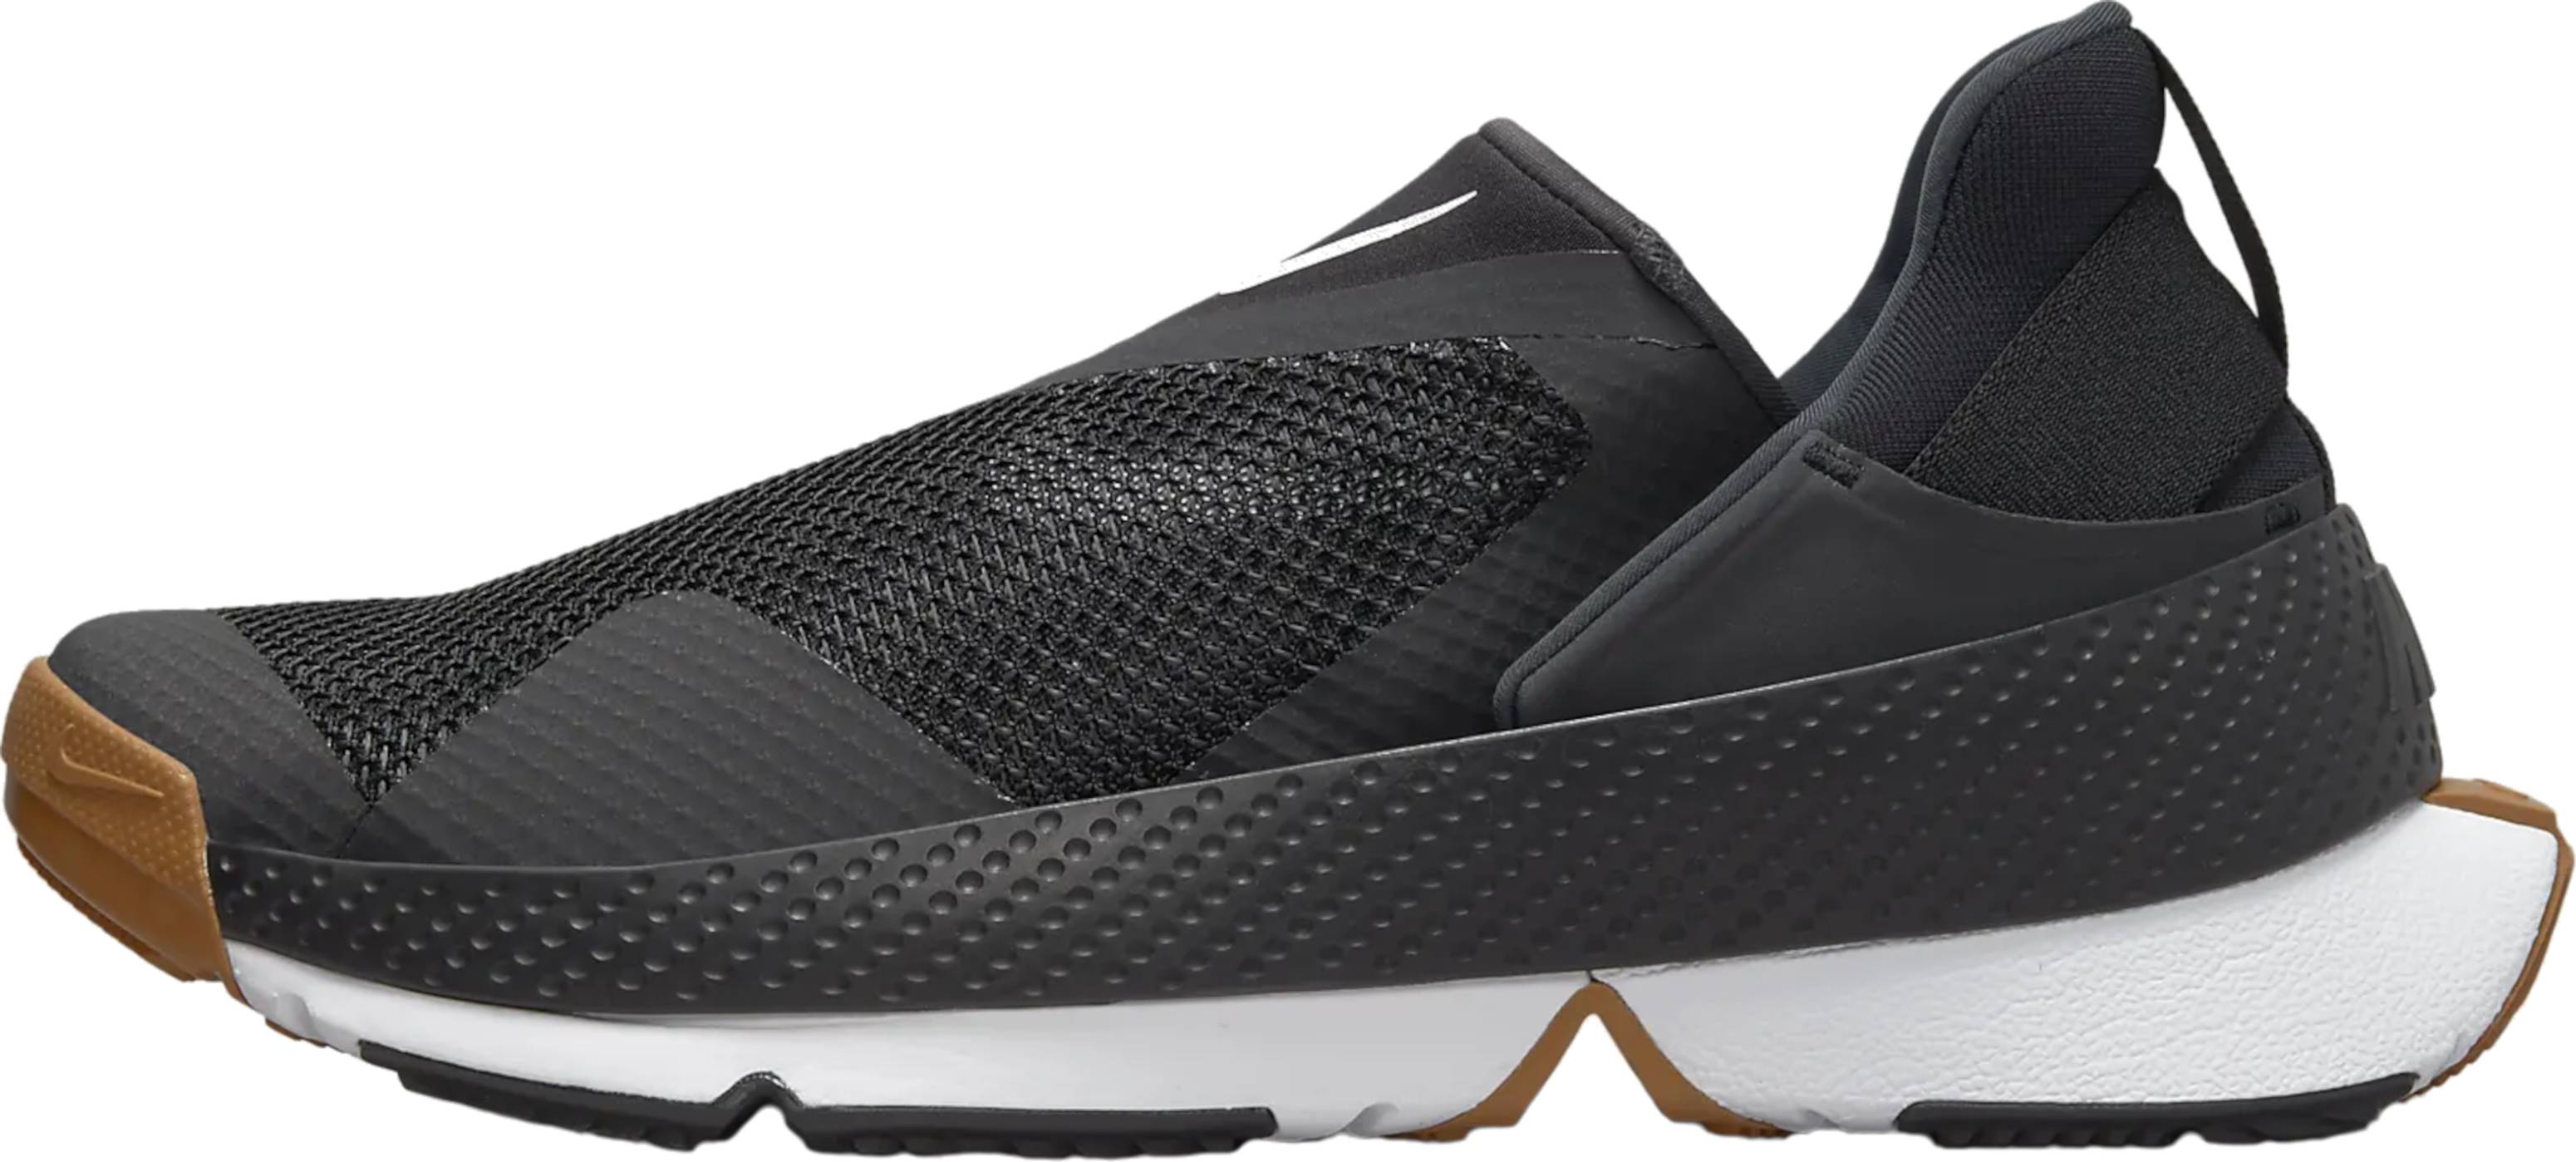 Nike Go FlyEase sneakers in 10+ colors (only $97) | RunRepeat